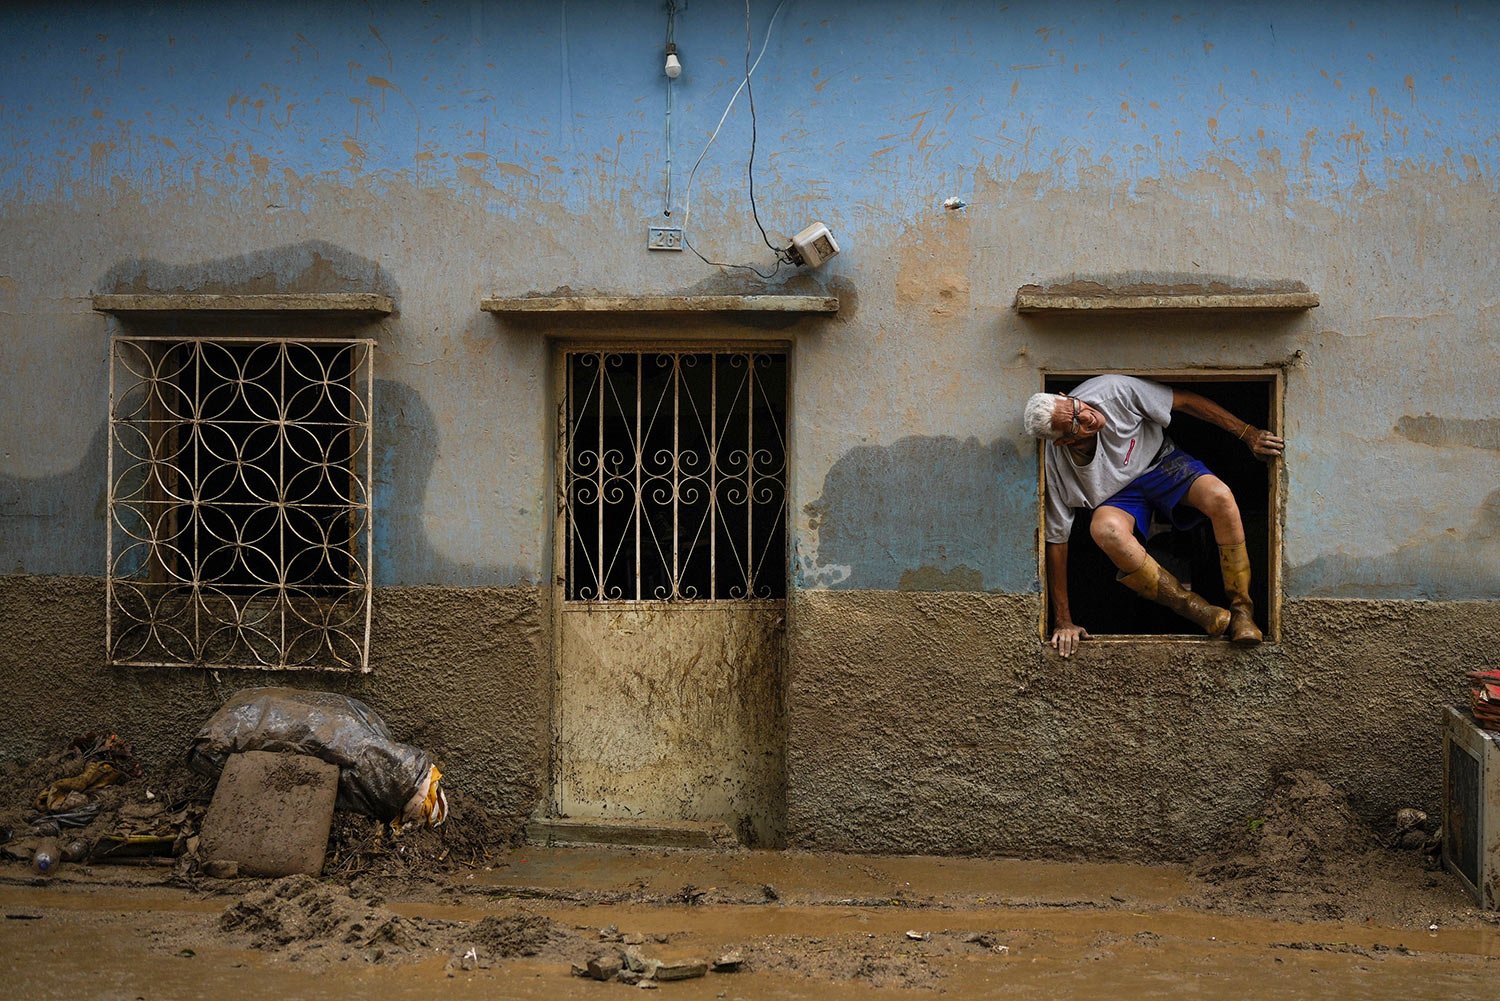  Jose Medina jumps out his home flooded by the overflow of a ravine caused by intense rains in Las Tejerias, Venezuela, Sunday, Oct. 9, 2022. (AP Photo/Matias Delacroix) 